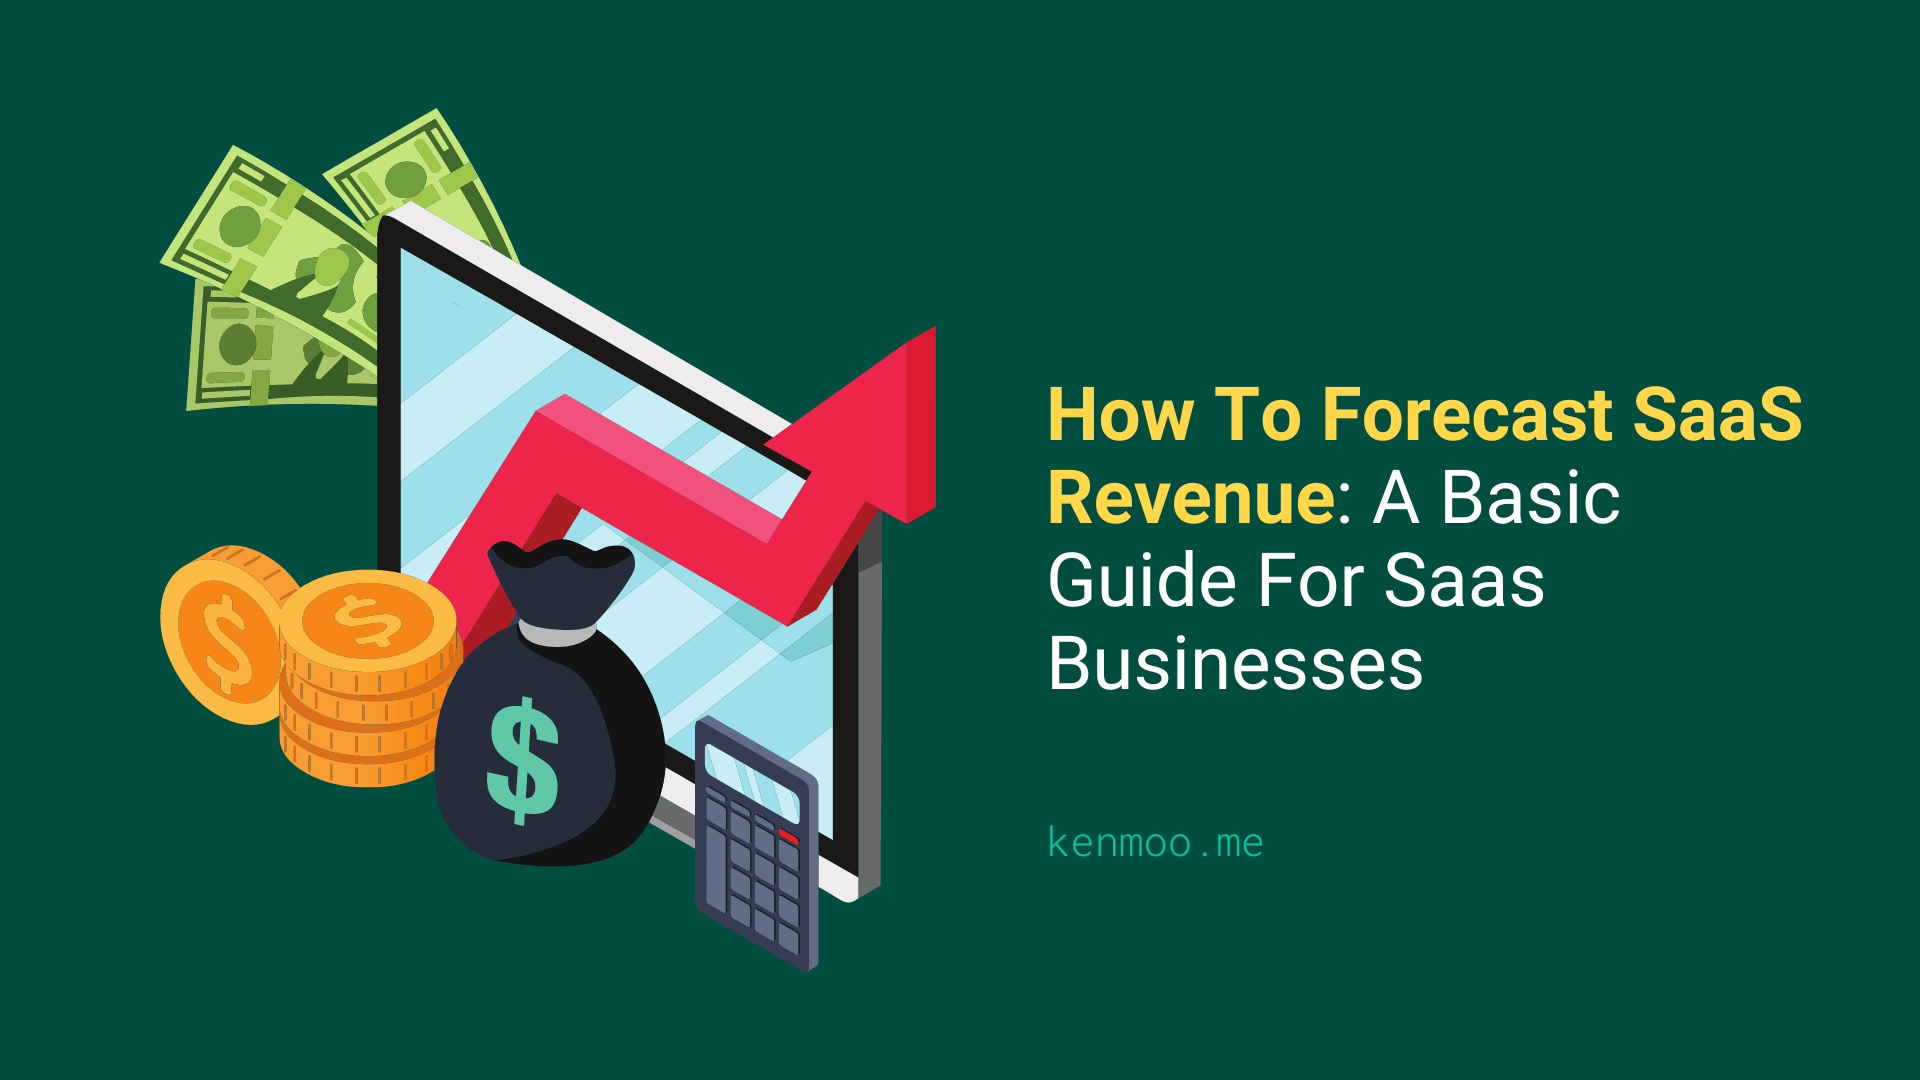 How To Forecast SaaS Revenue: A Basic Guide For Saas Businesses